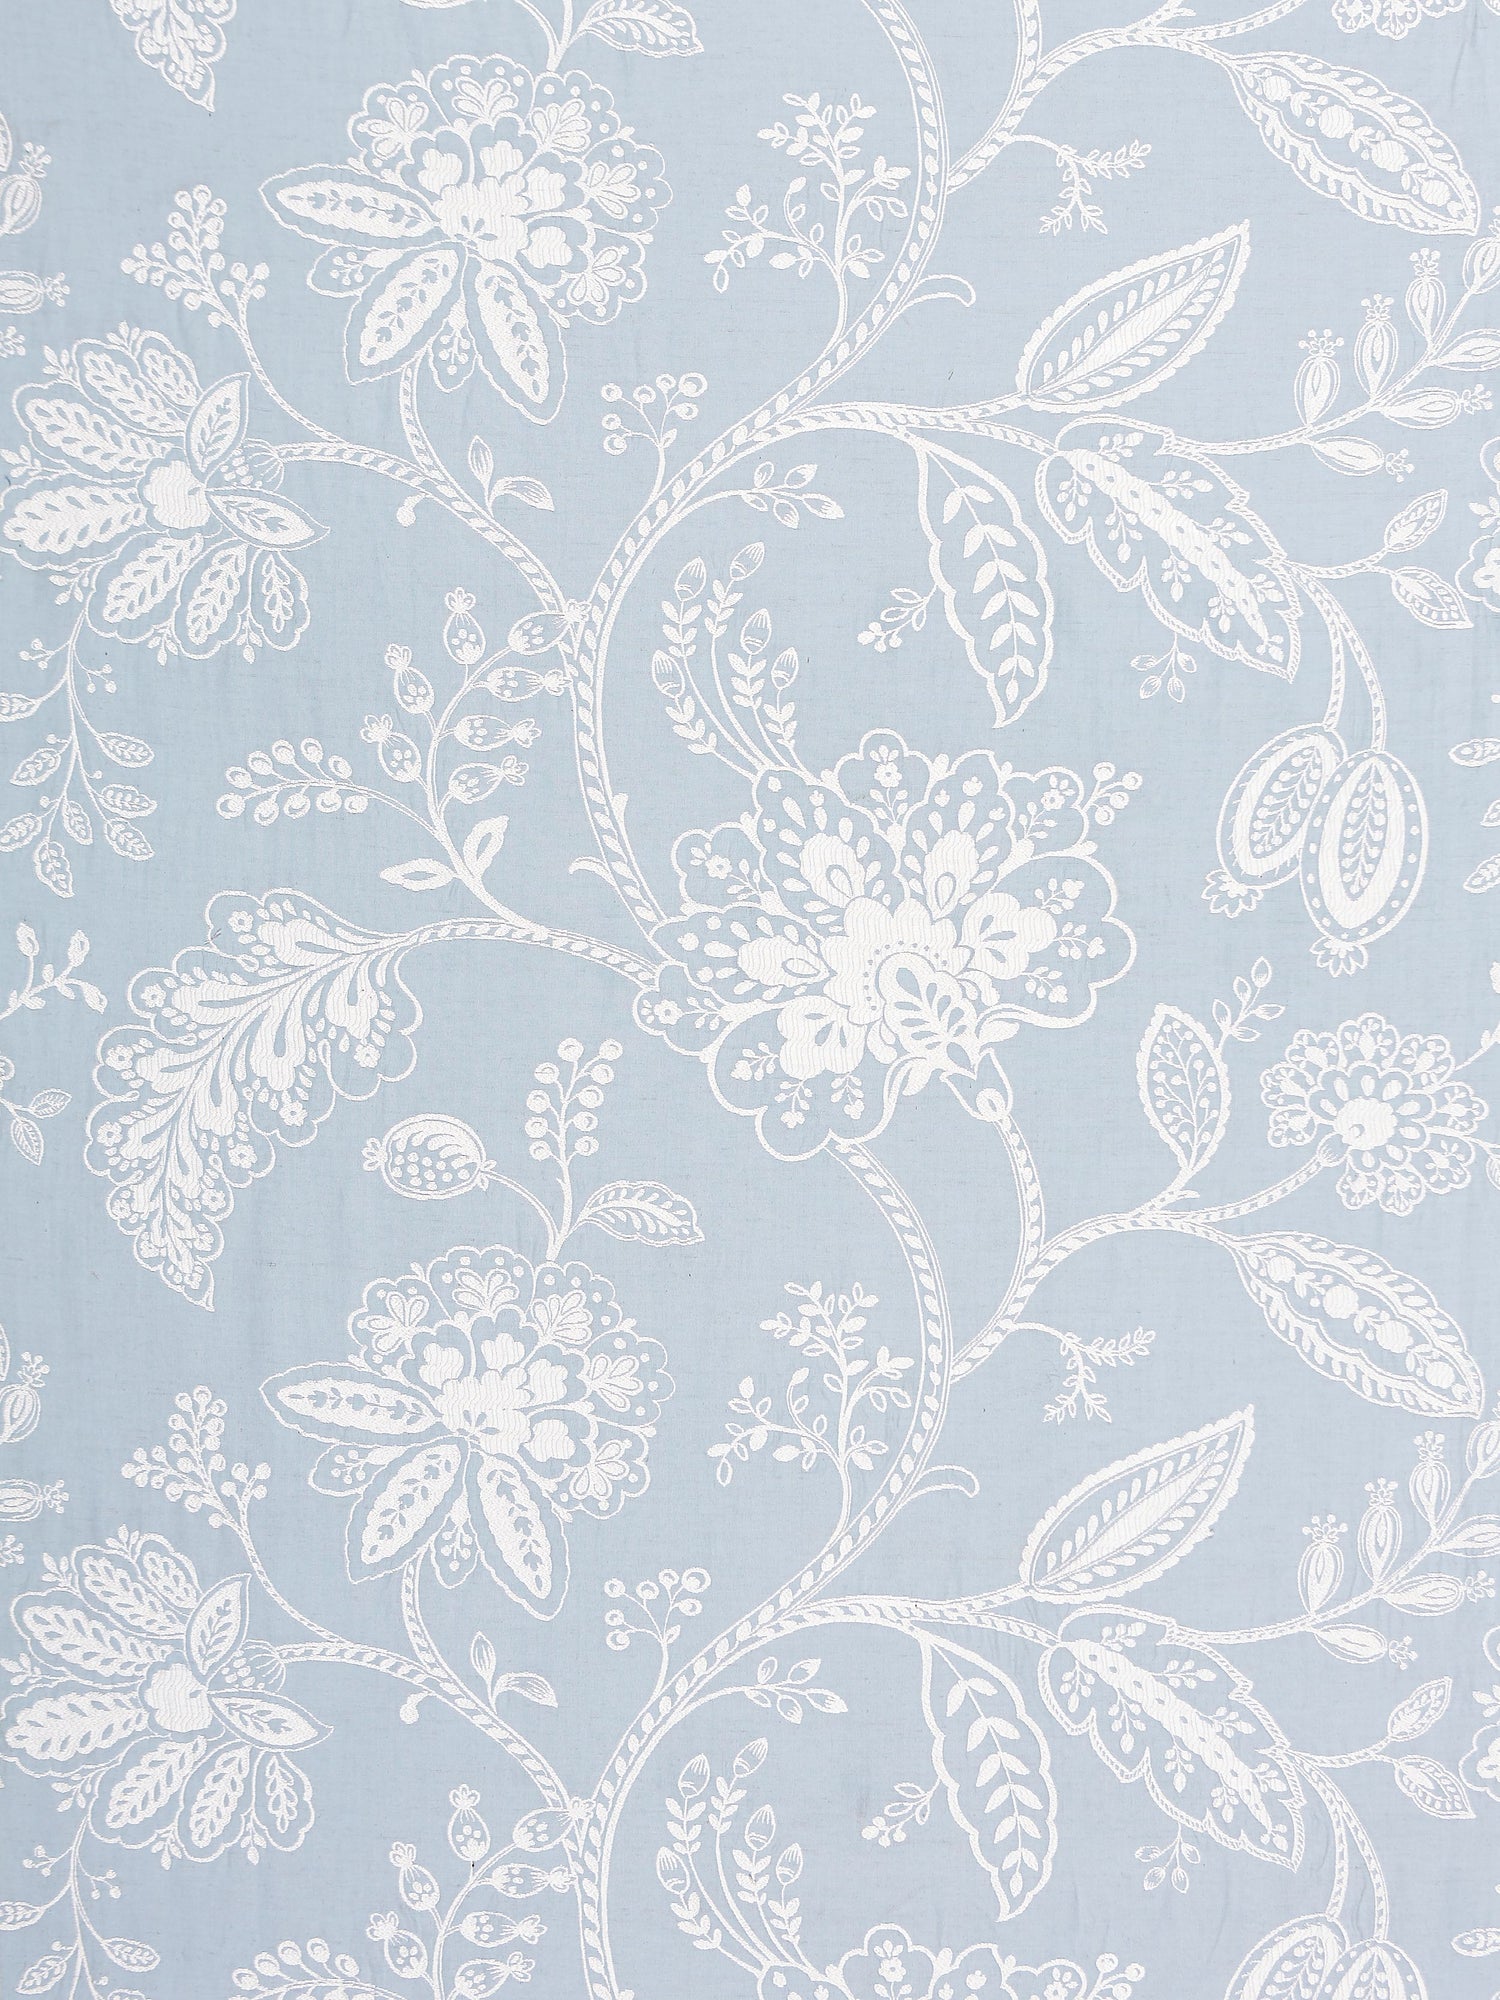 Kaveri Vine fabric in sky color - pattern number SC 000127011 - by Scalamandre in the Scalamandre Fabrics Book 1 collection